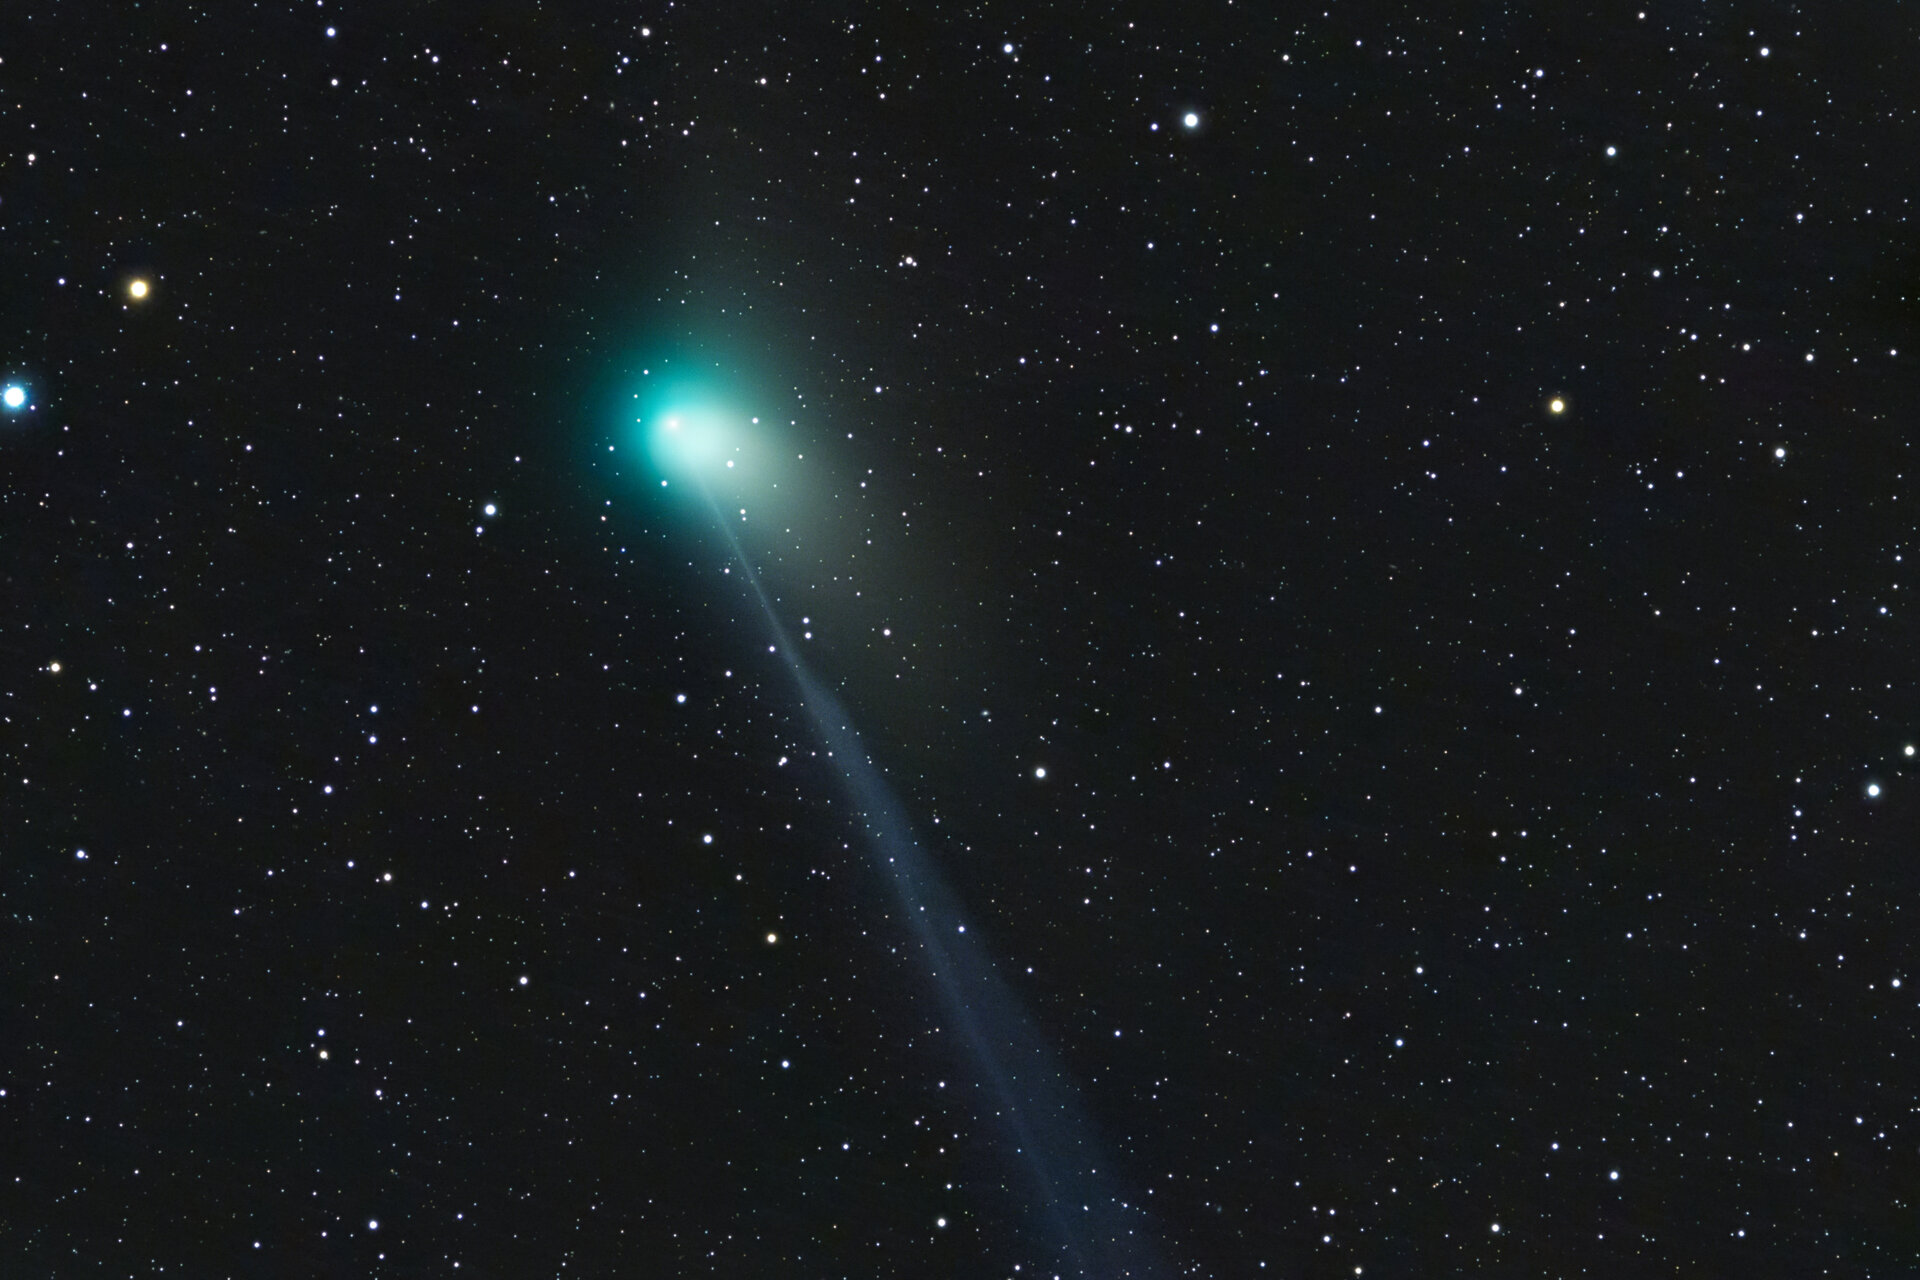 Comet ZTF and its apparent three tails